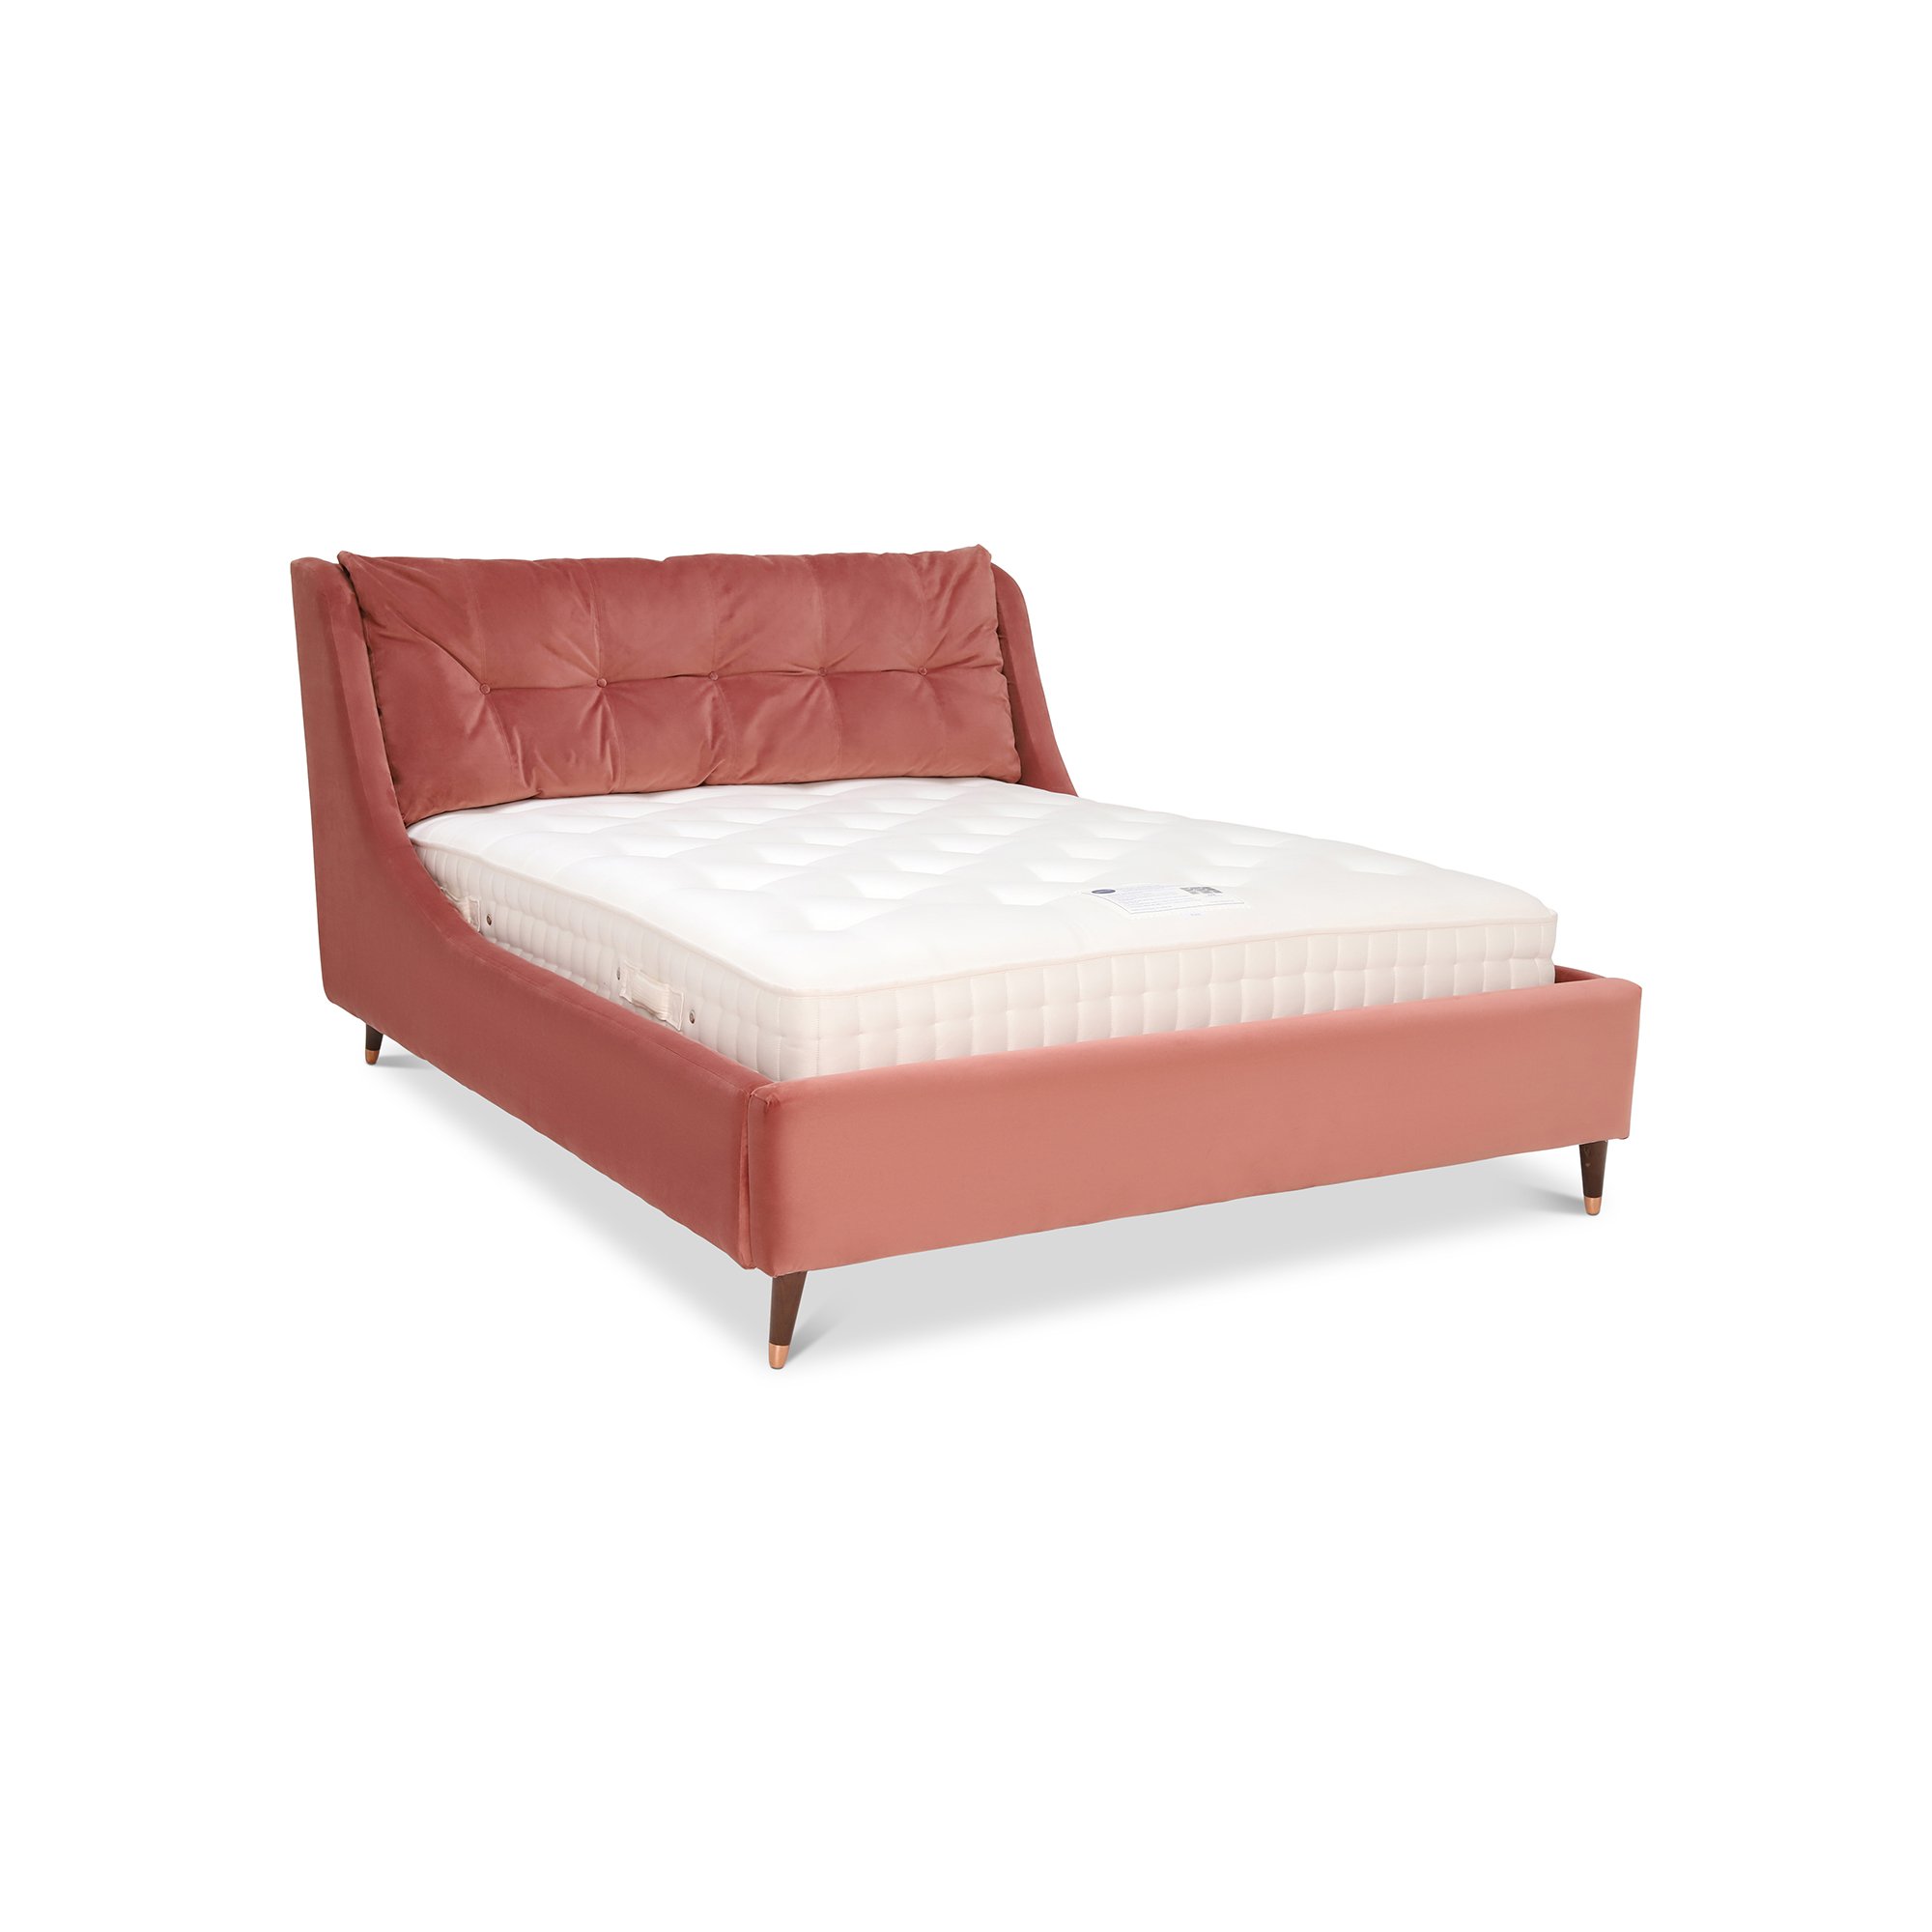 Raul Double Bed Frame, Pink | Barker & Stonehouse